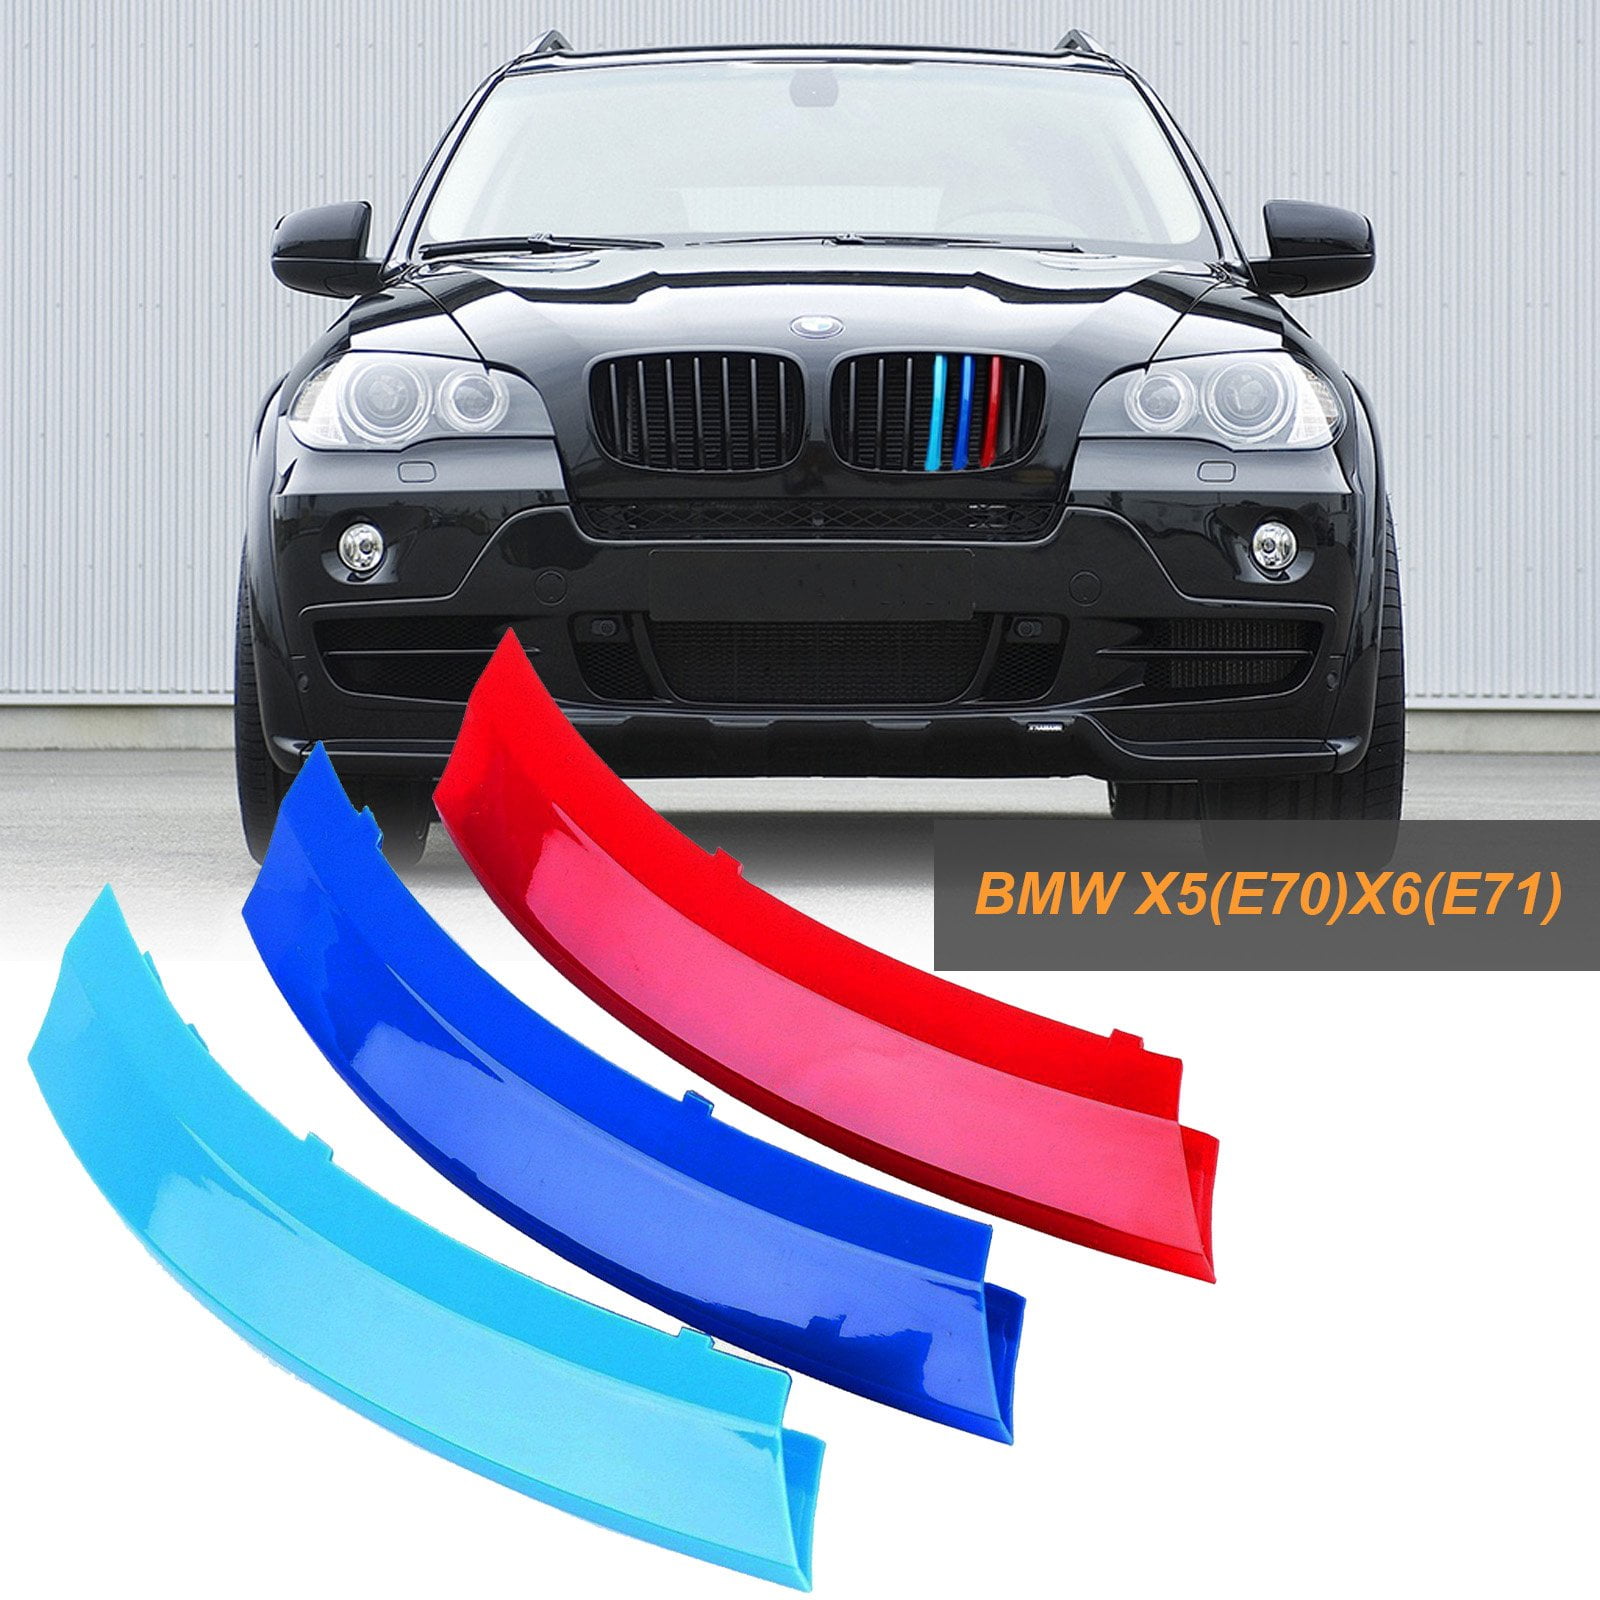 M Color Front Grill Insert Kidney Grille Trim Cover 7 Bar for BMW X6 E71 E72